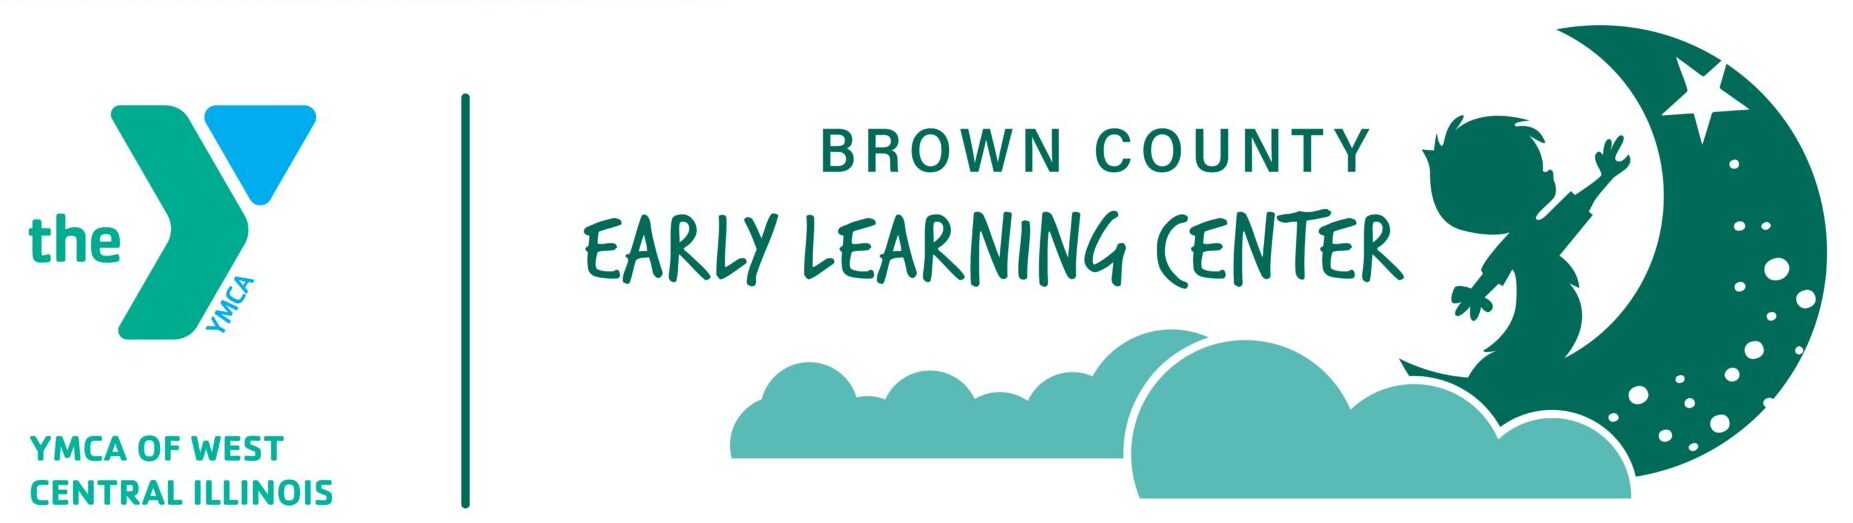 Brown County Early Learning Center